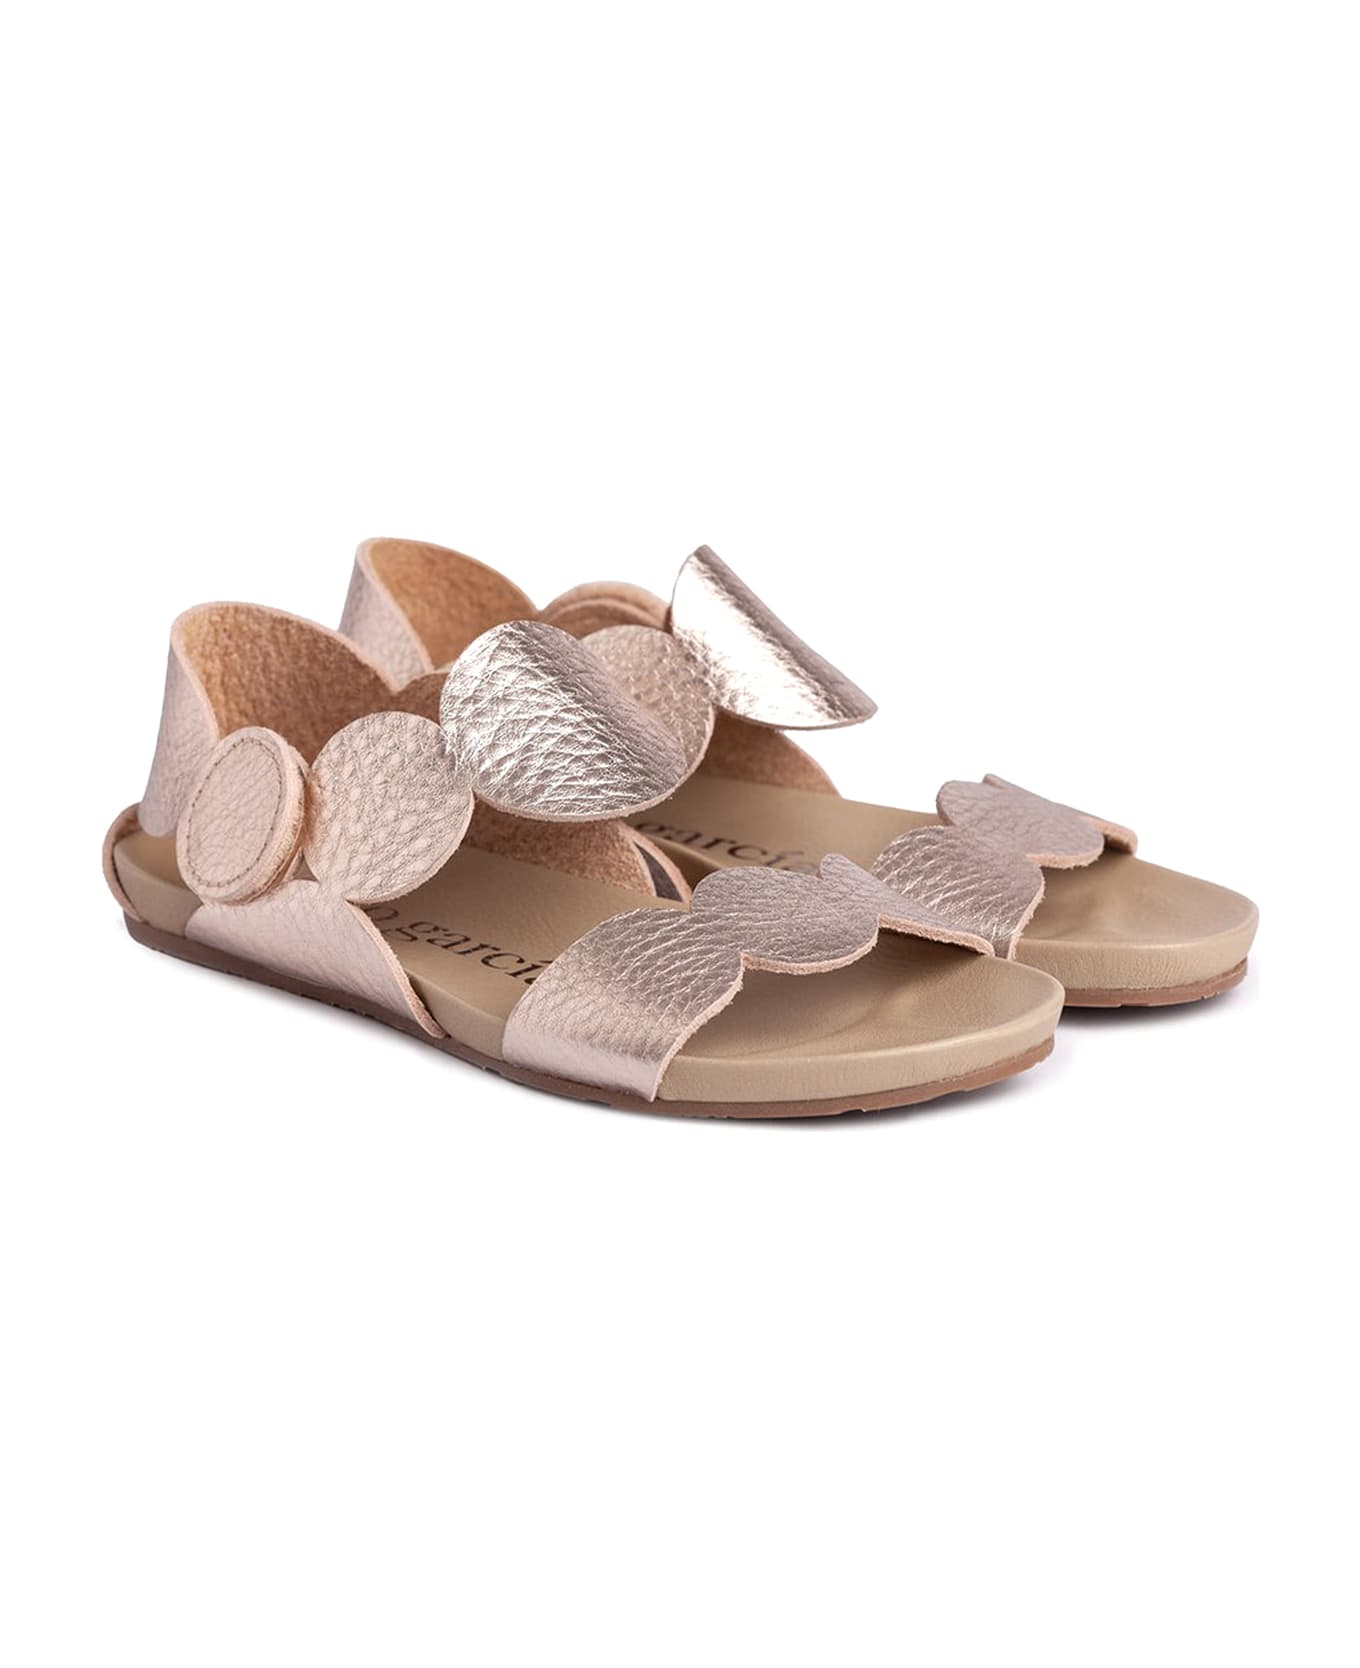 Pedro Garcia Jeanne Sandal In Laminated Grained Leather - SIROCCO サンダル